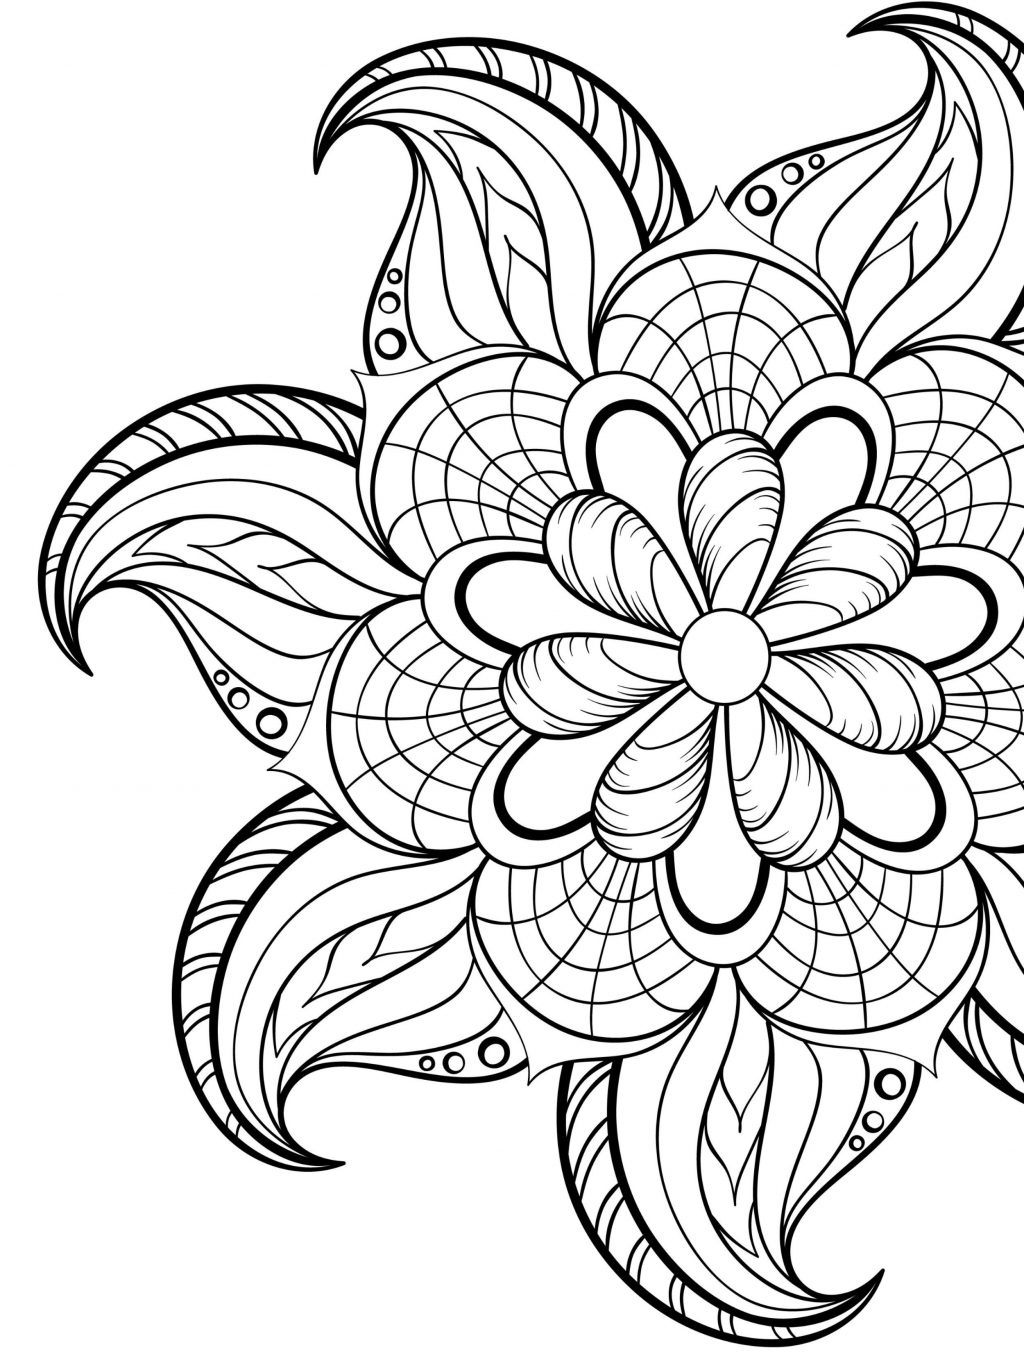 Coloring Page ~ Astonishing Free Printable Colorings Gorgeous Adult - Free Printable Coloring Books For Adults